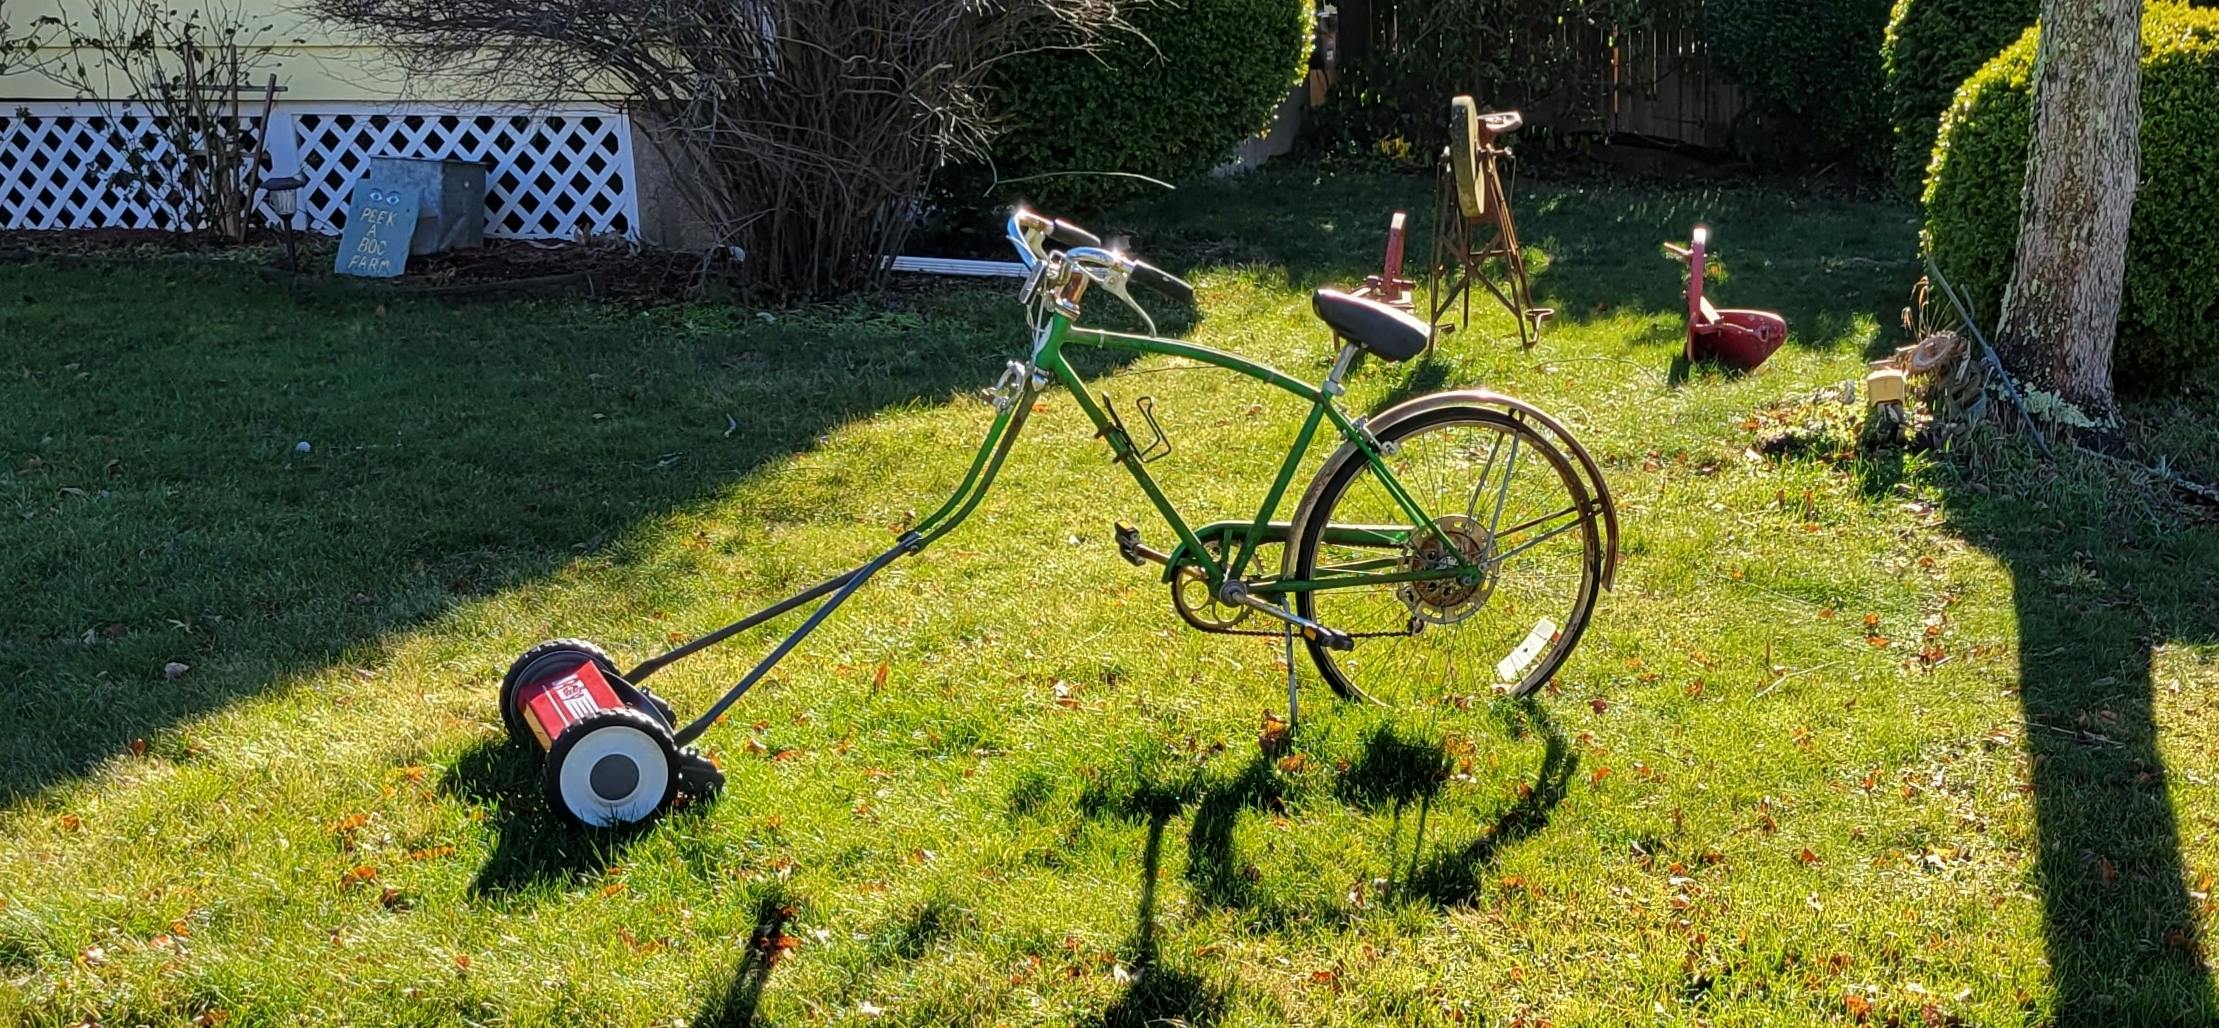 Bicycle powered lawn mower